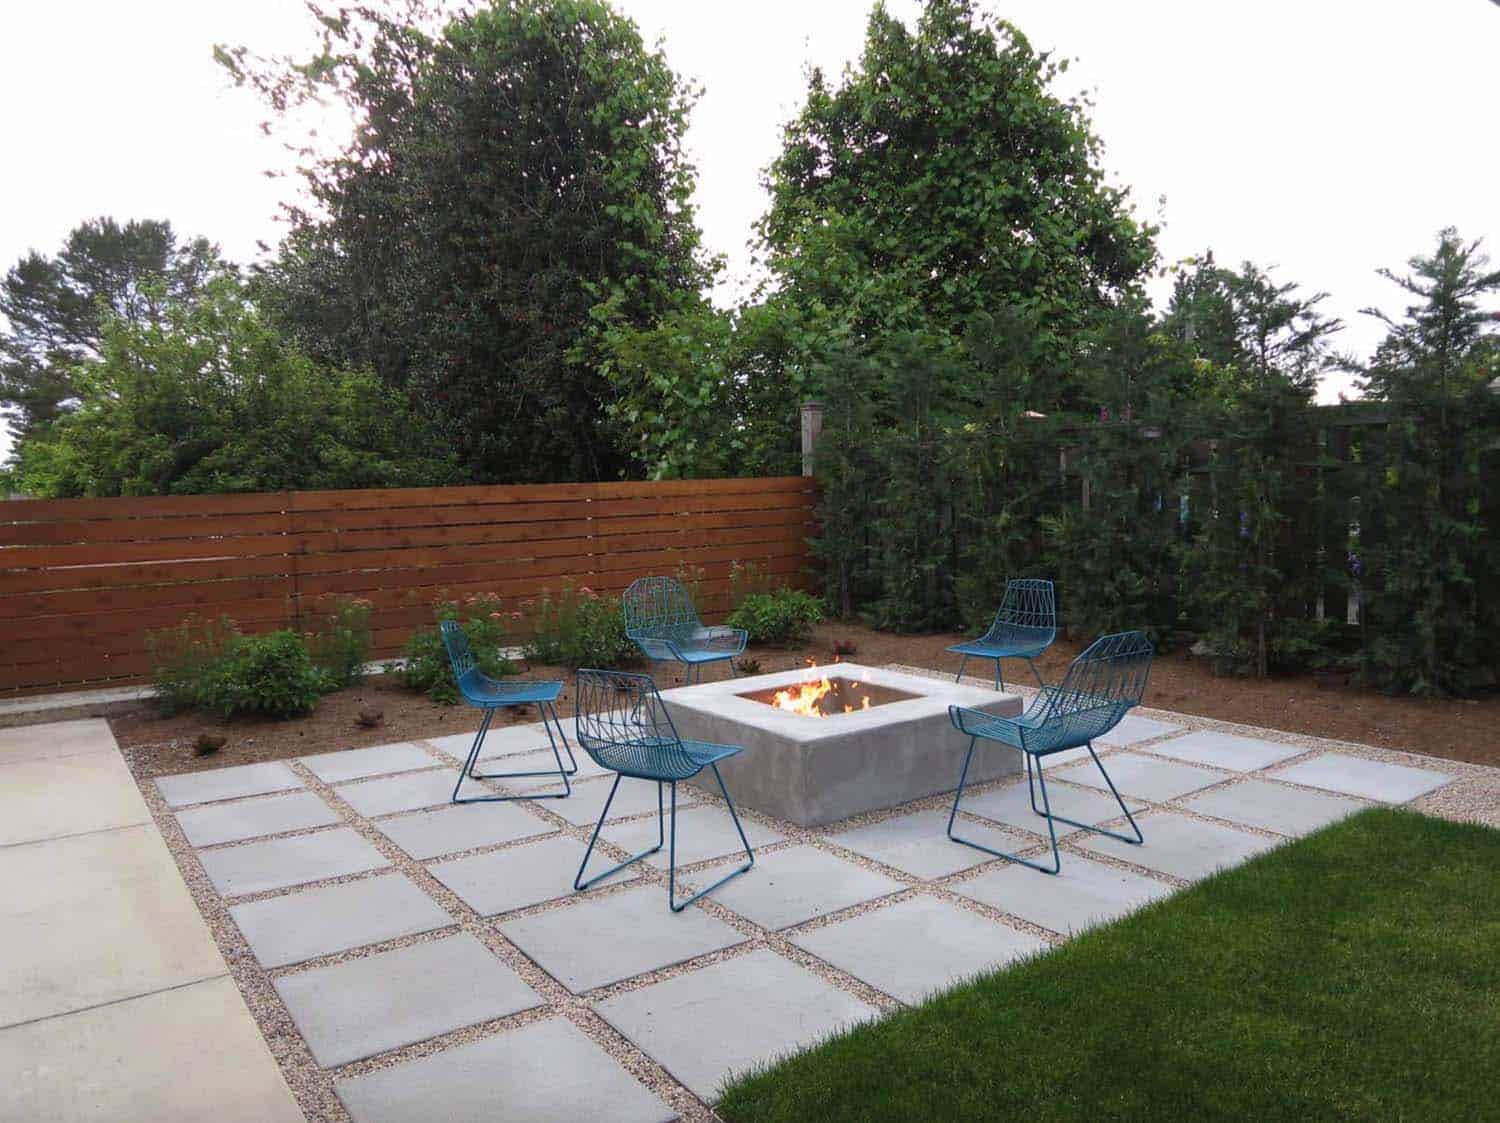 28 Inspiring Fire Pit Ideas To Create A, Paver Fire Pit Designs